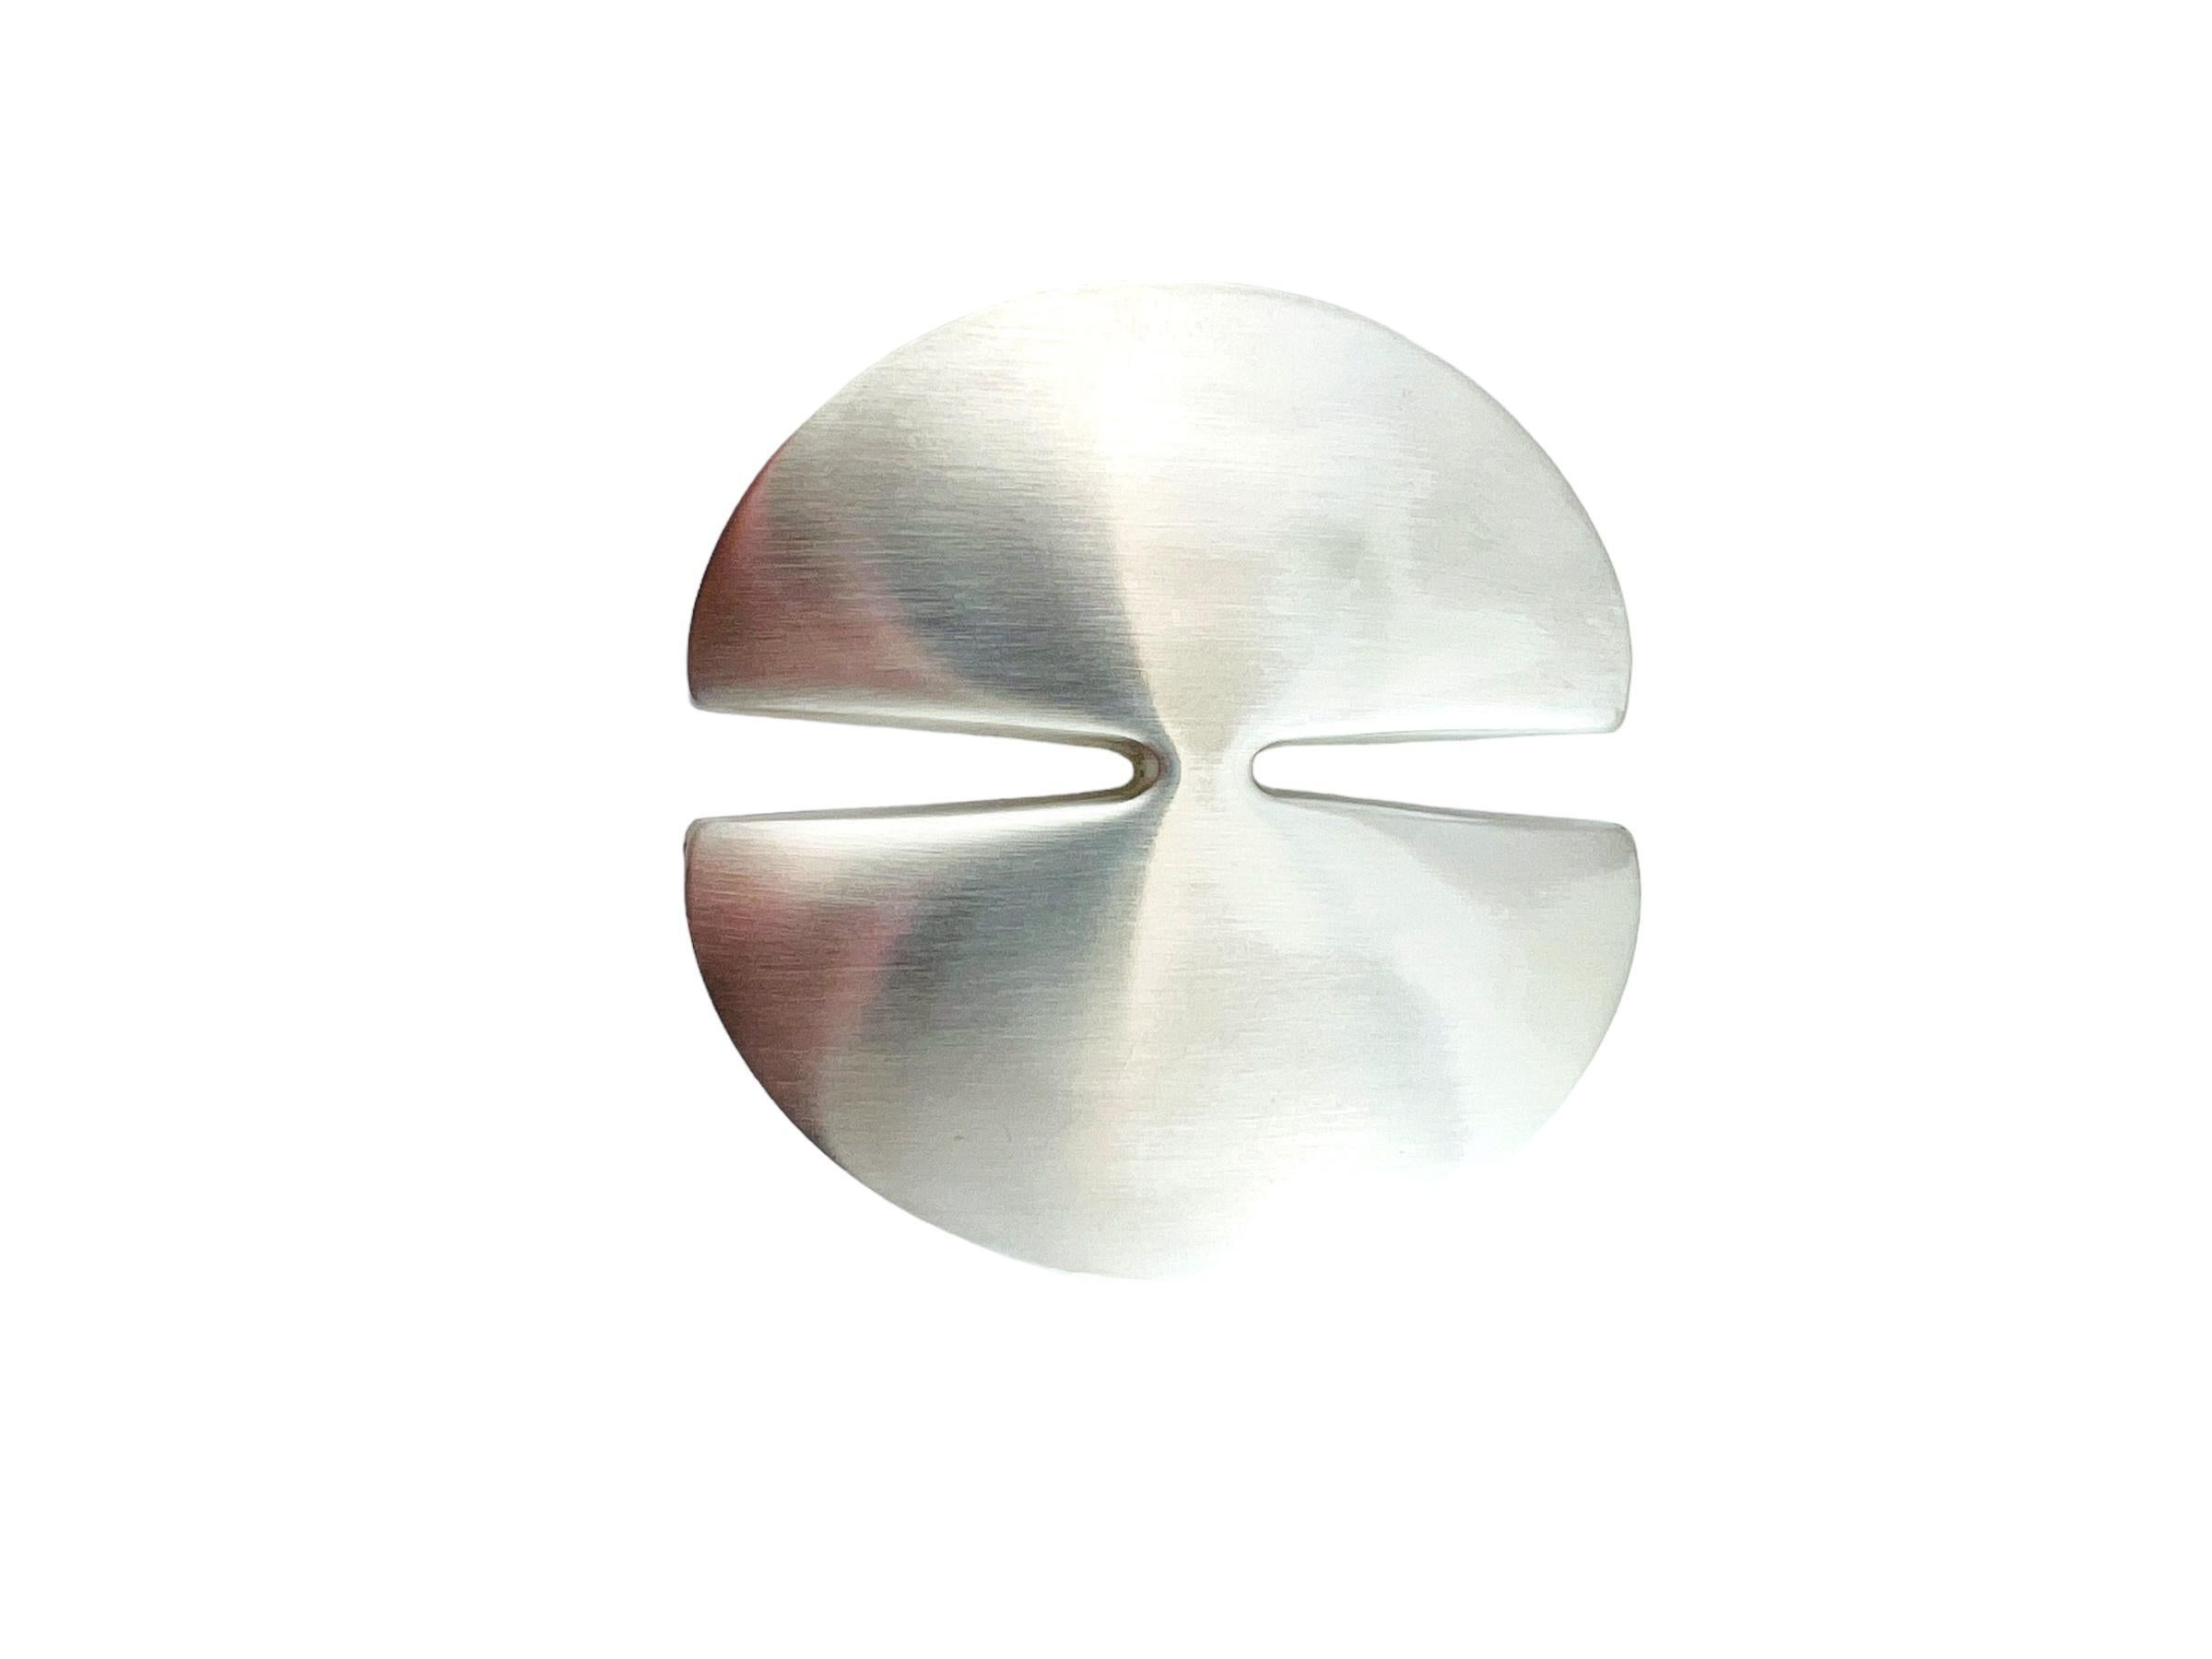 1960's Georg Jensen Nanna Ditzel Sterling Silver Large Abstract Pin #A337

This large abstract pin was designed by Nanna Ditzel for Georg Jensen

Approx. 2 3/8